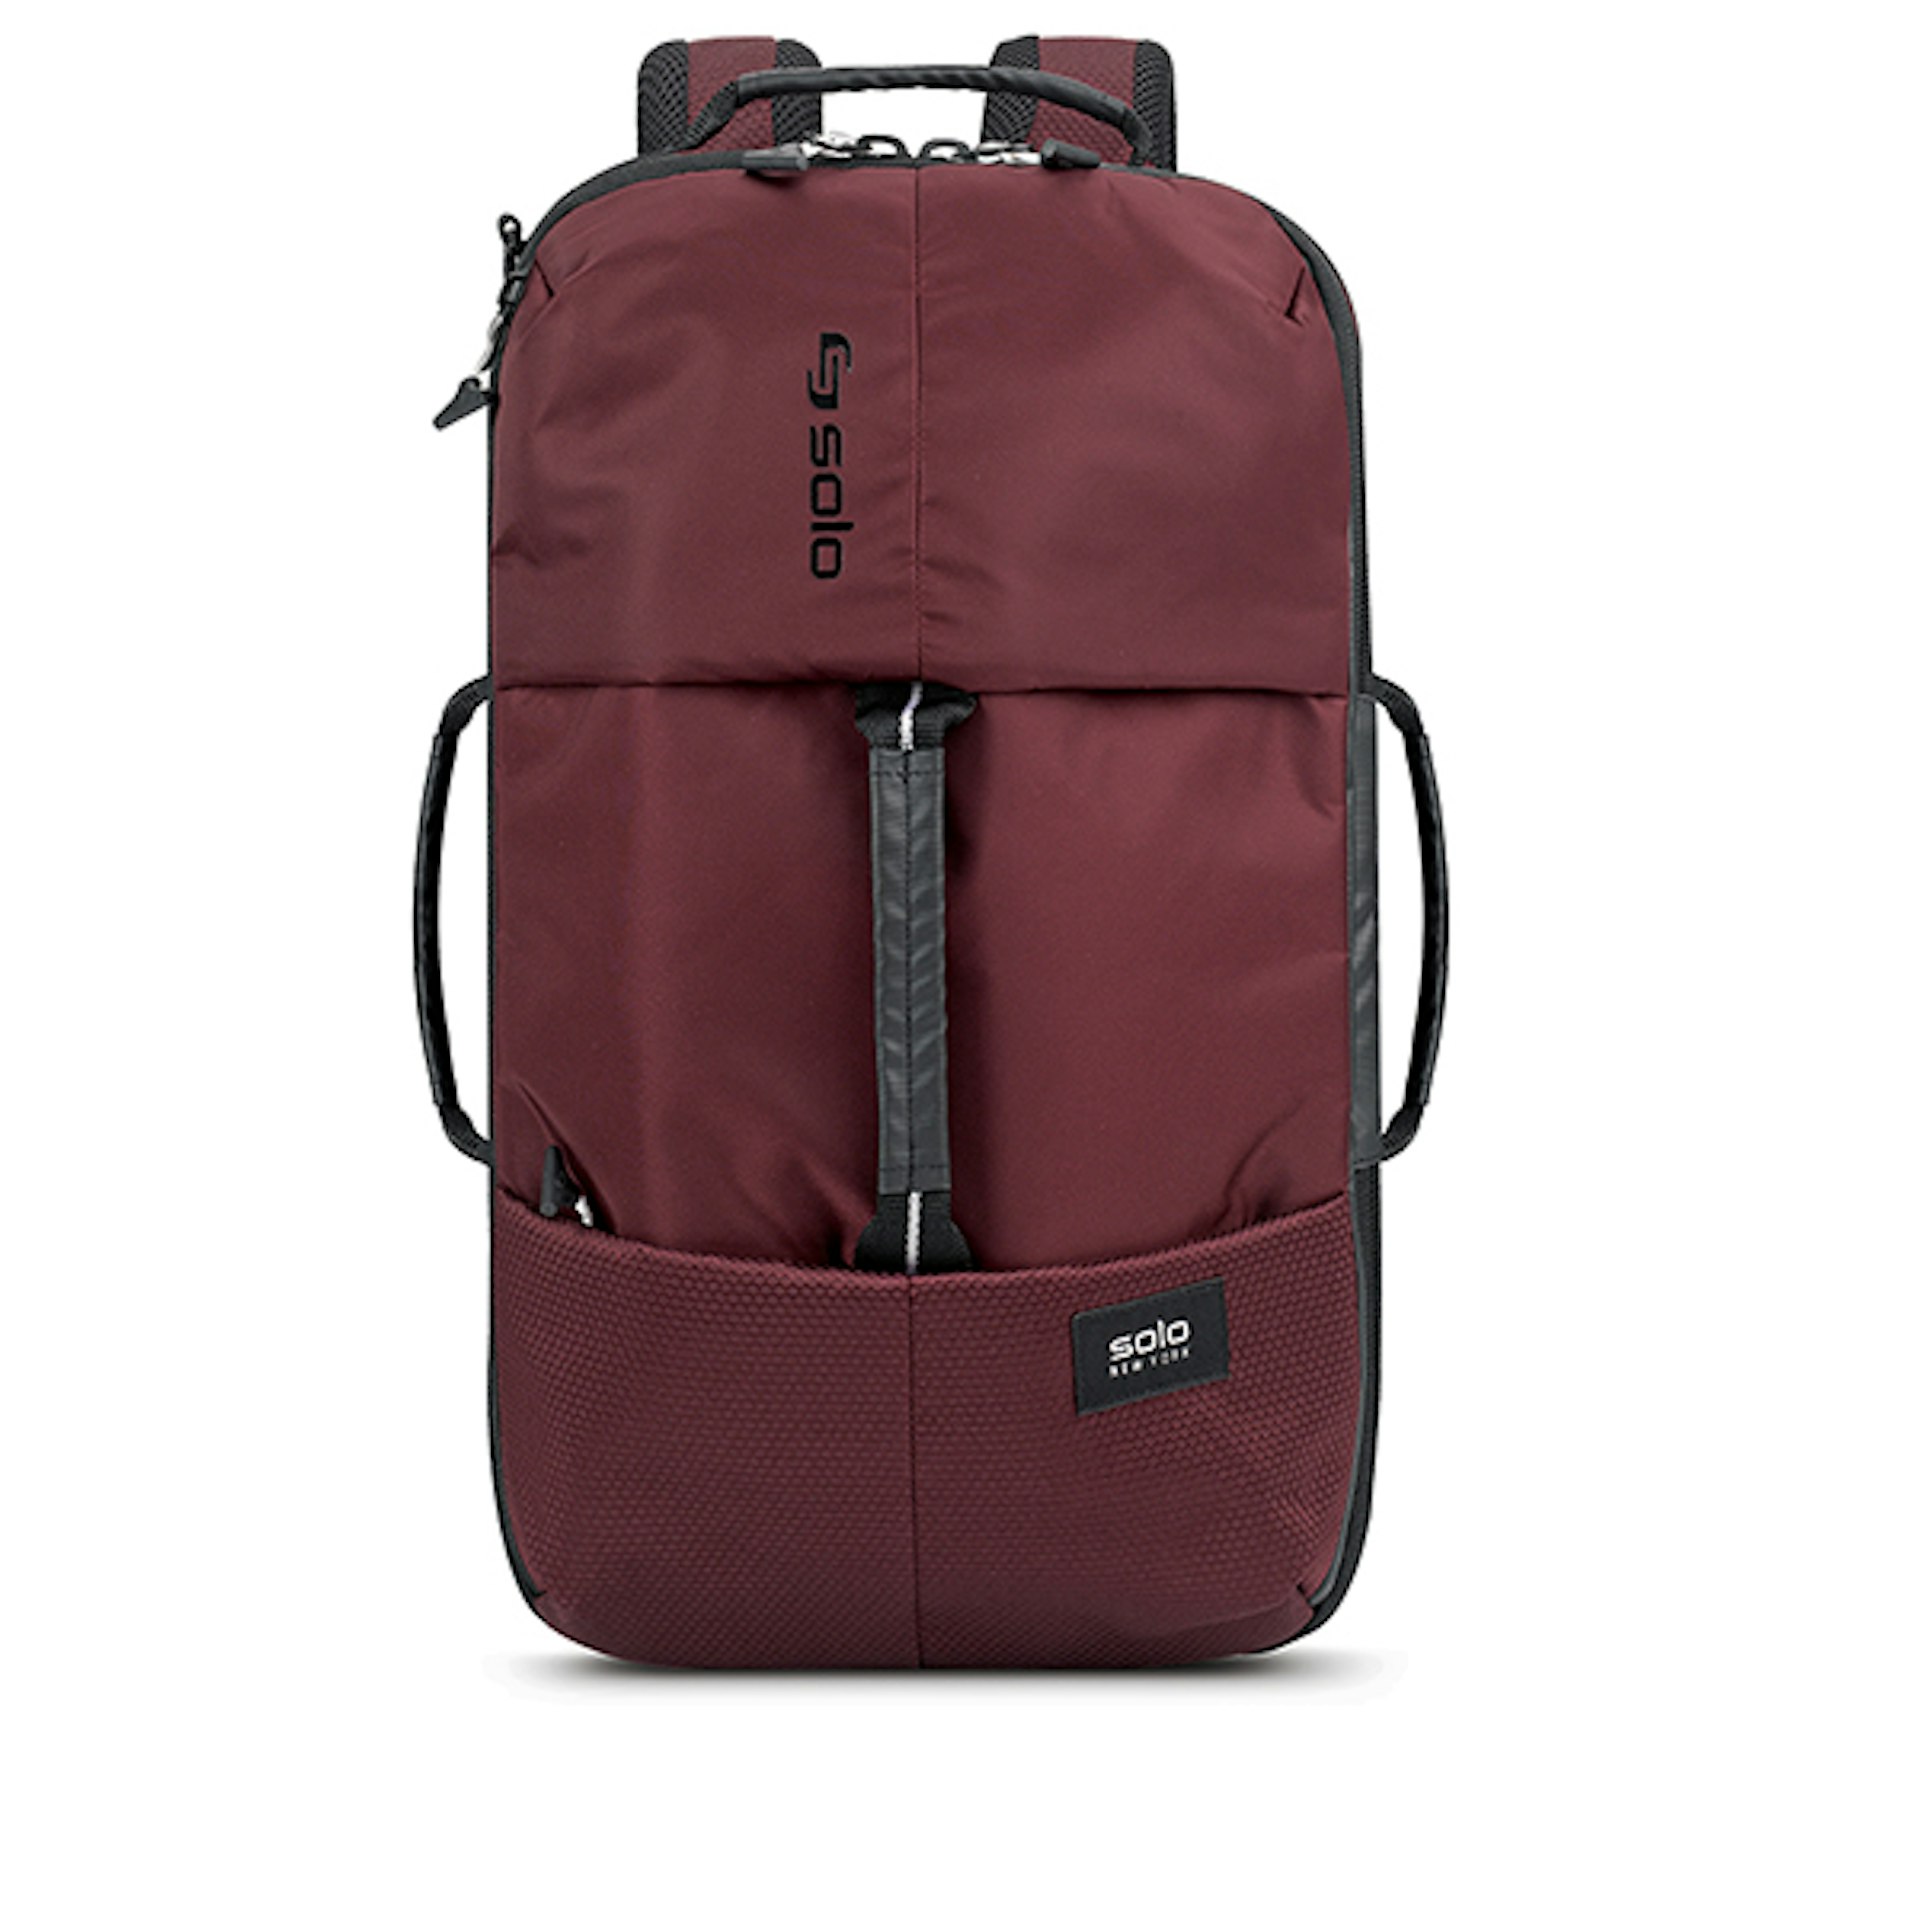 The All-Star Backpack Duffel in red